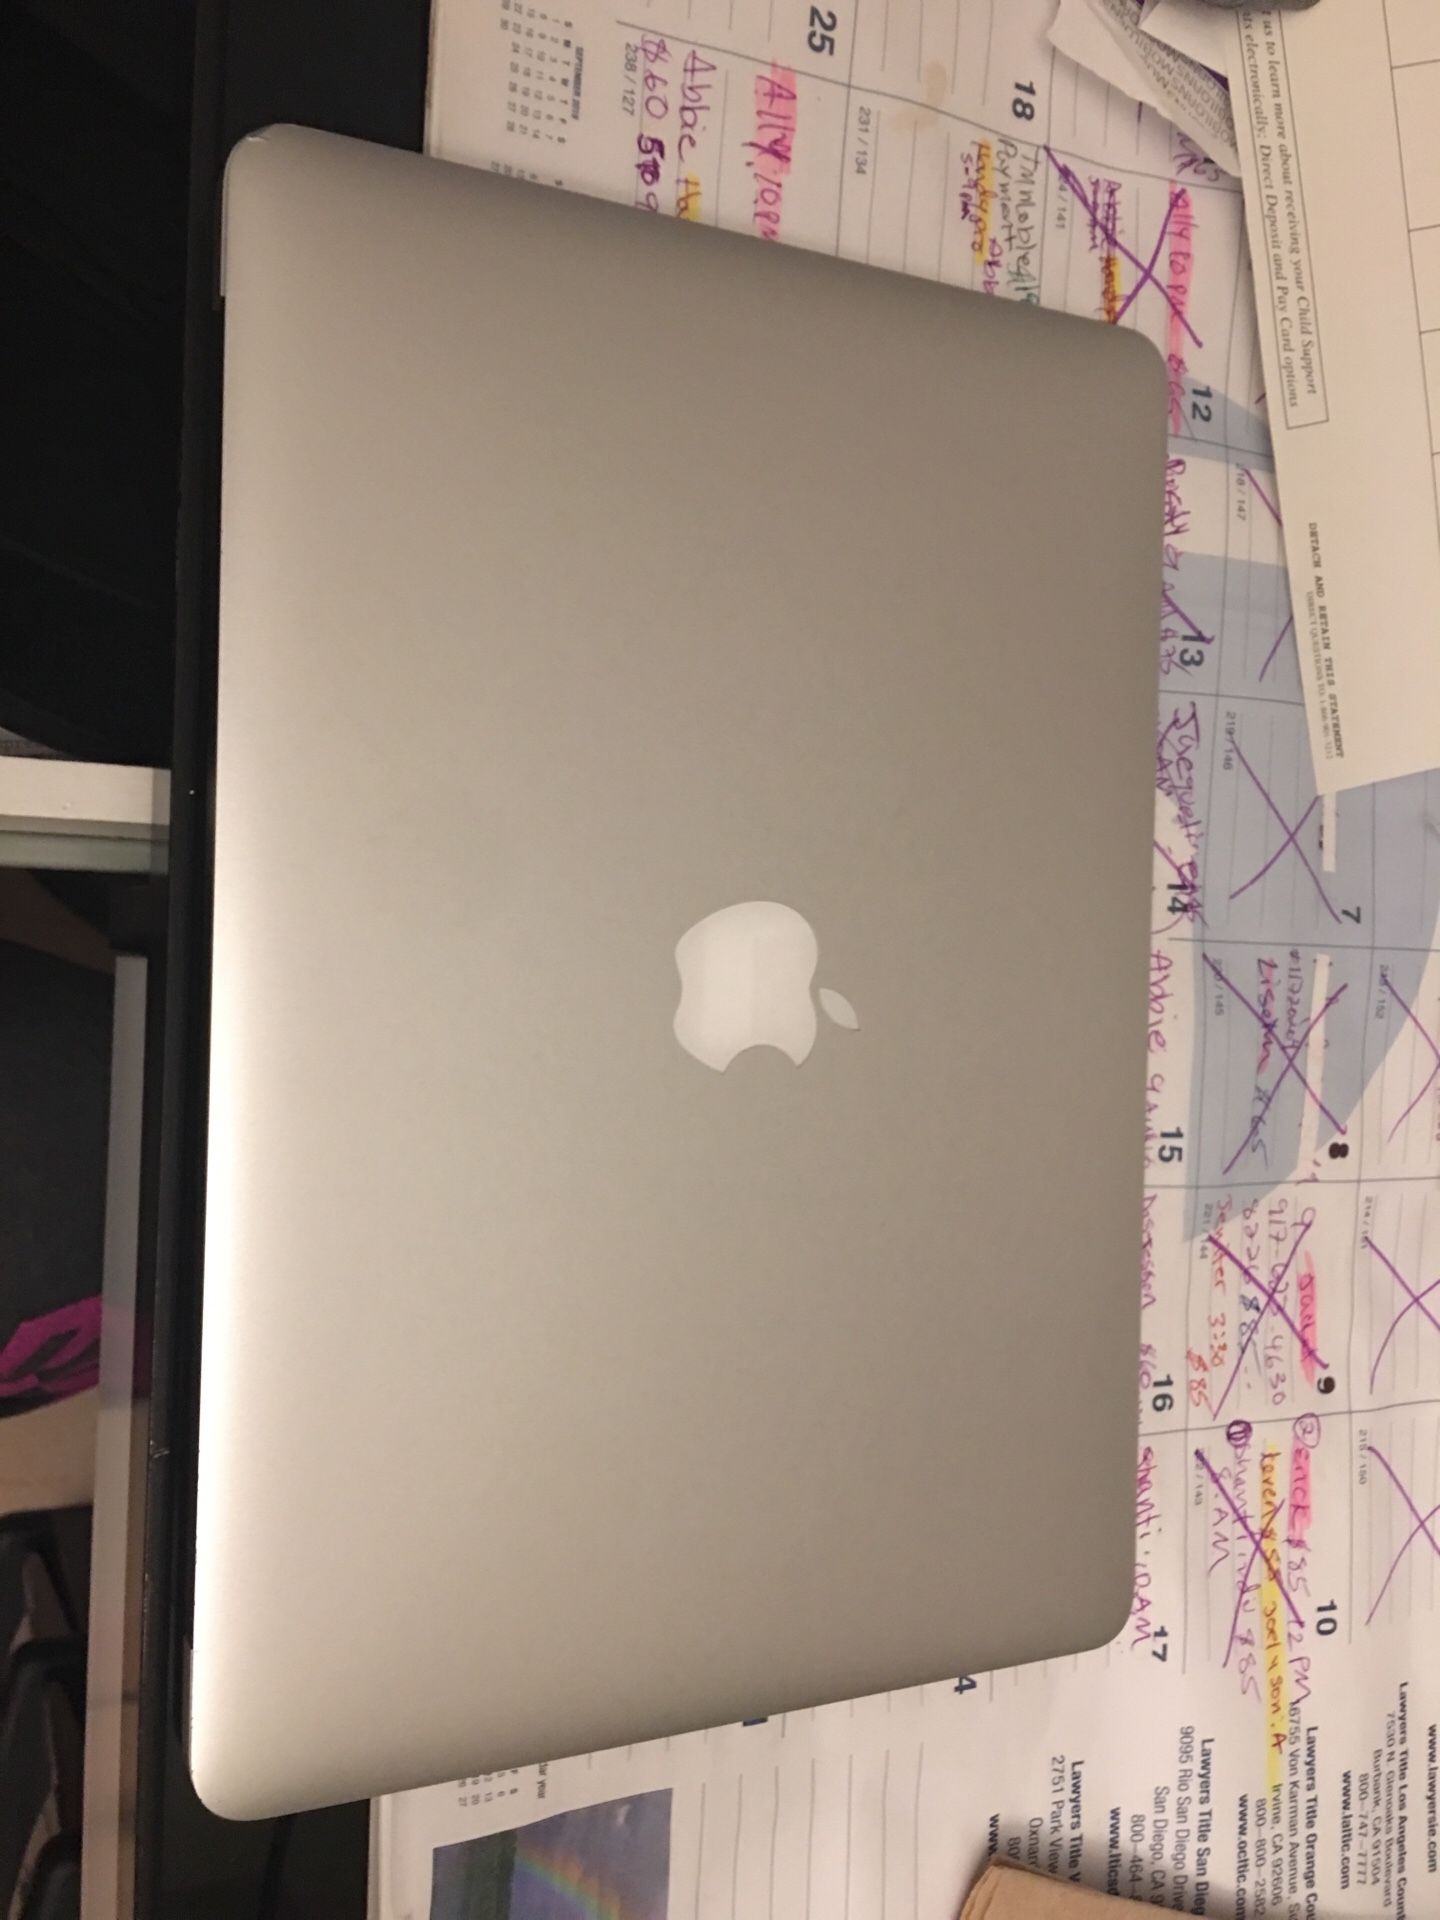 MacBook Air in good condition